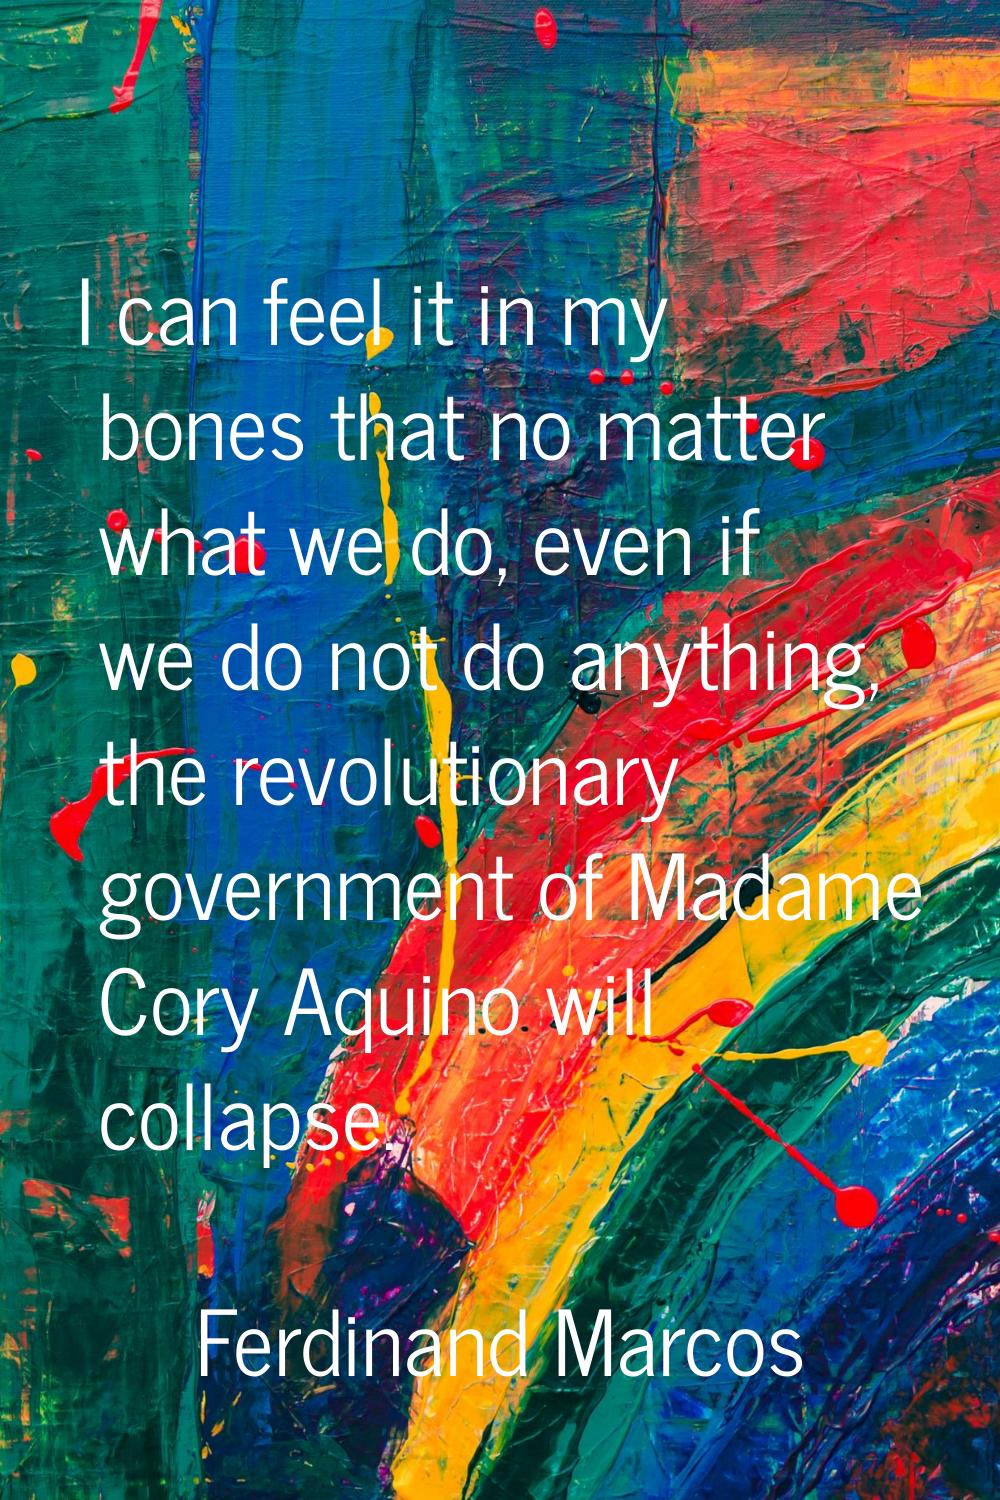 I can feel it in my bones that no matter what we do, even if we do not do anything, the revolutiona